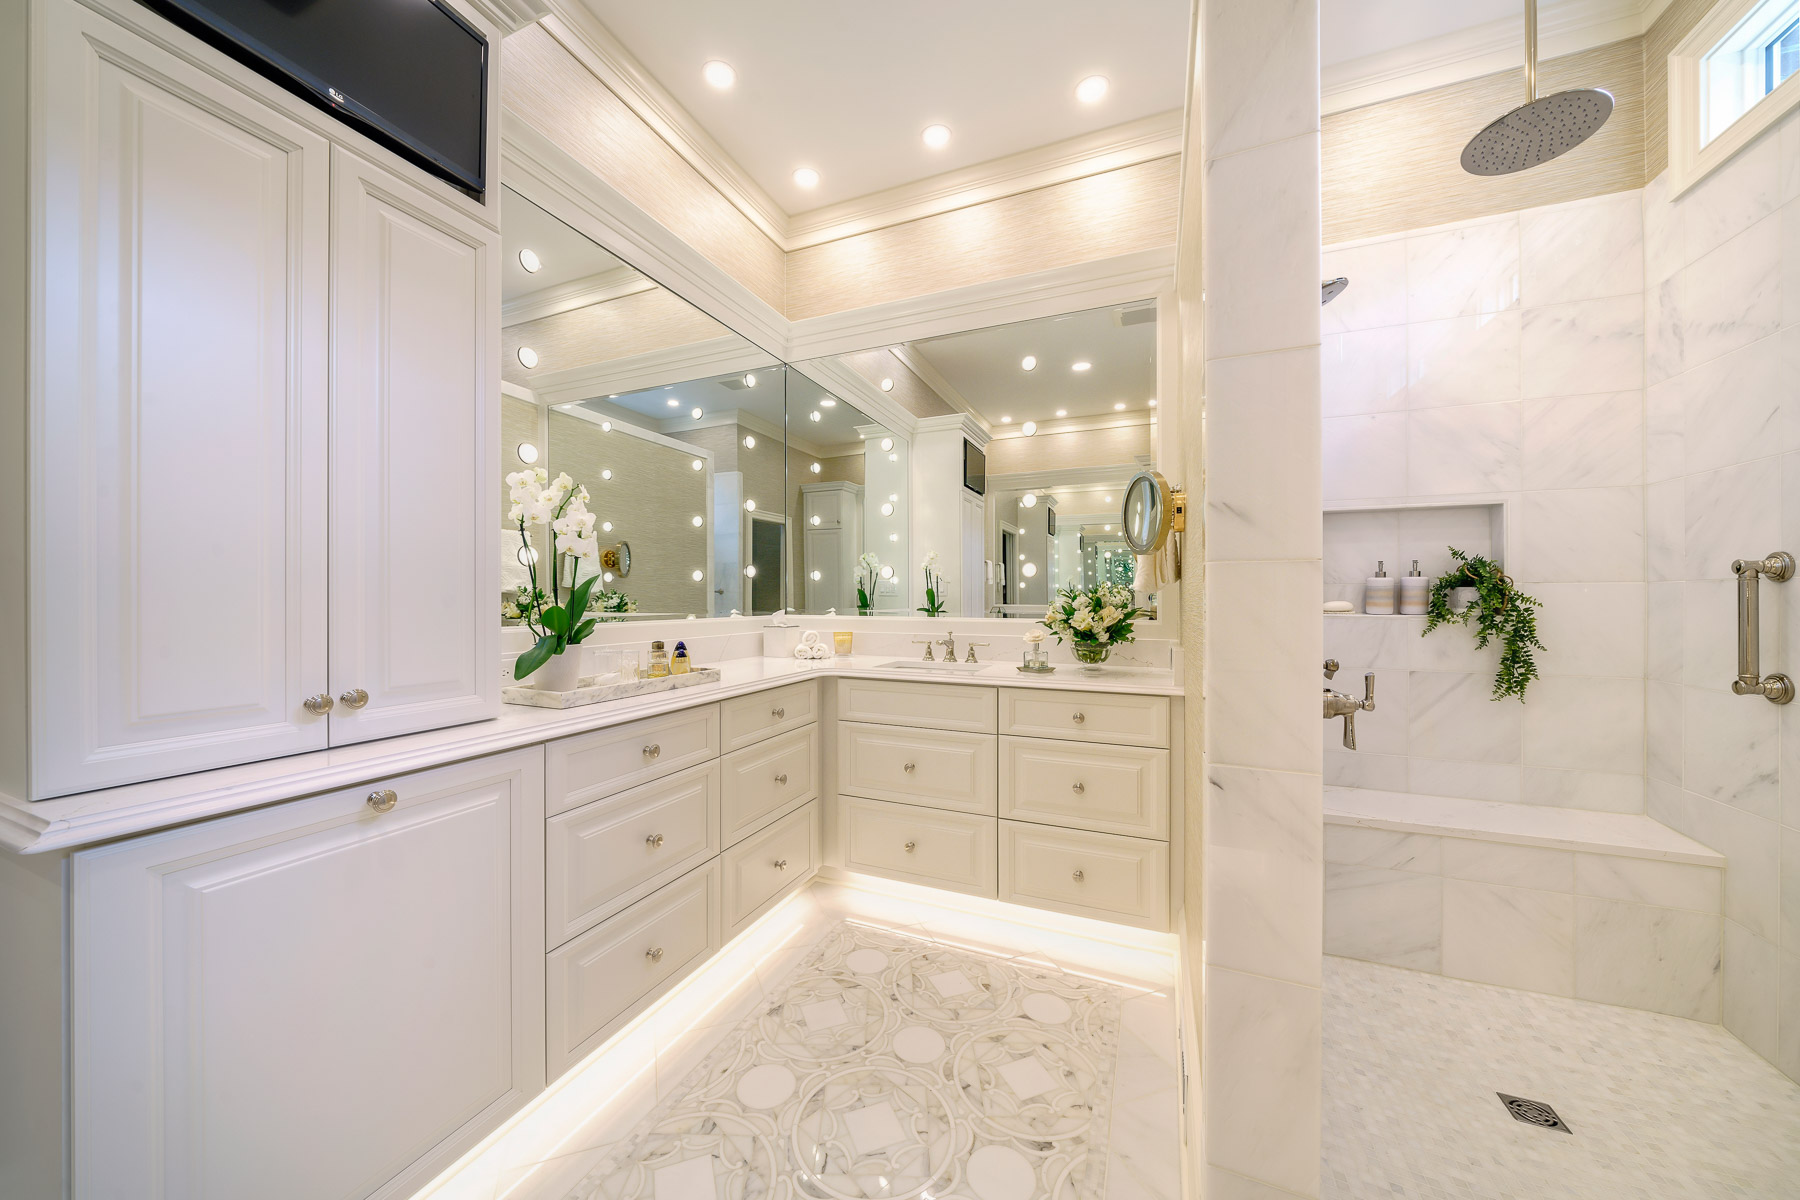 After 20+ years of living in their custom built home on Reynolds Square, these homeowners decided it was time for a primary bathroom refresh.